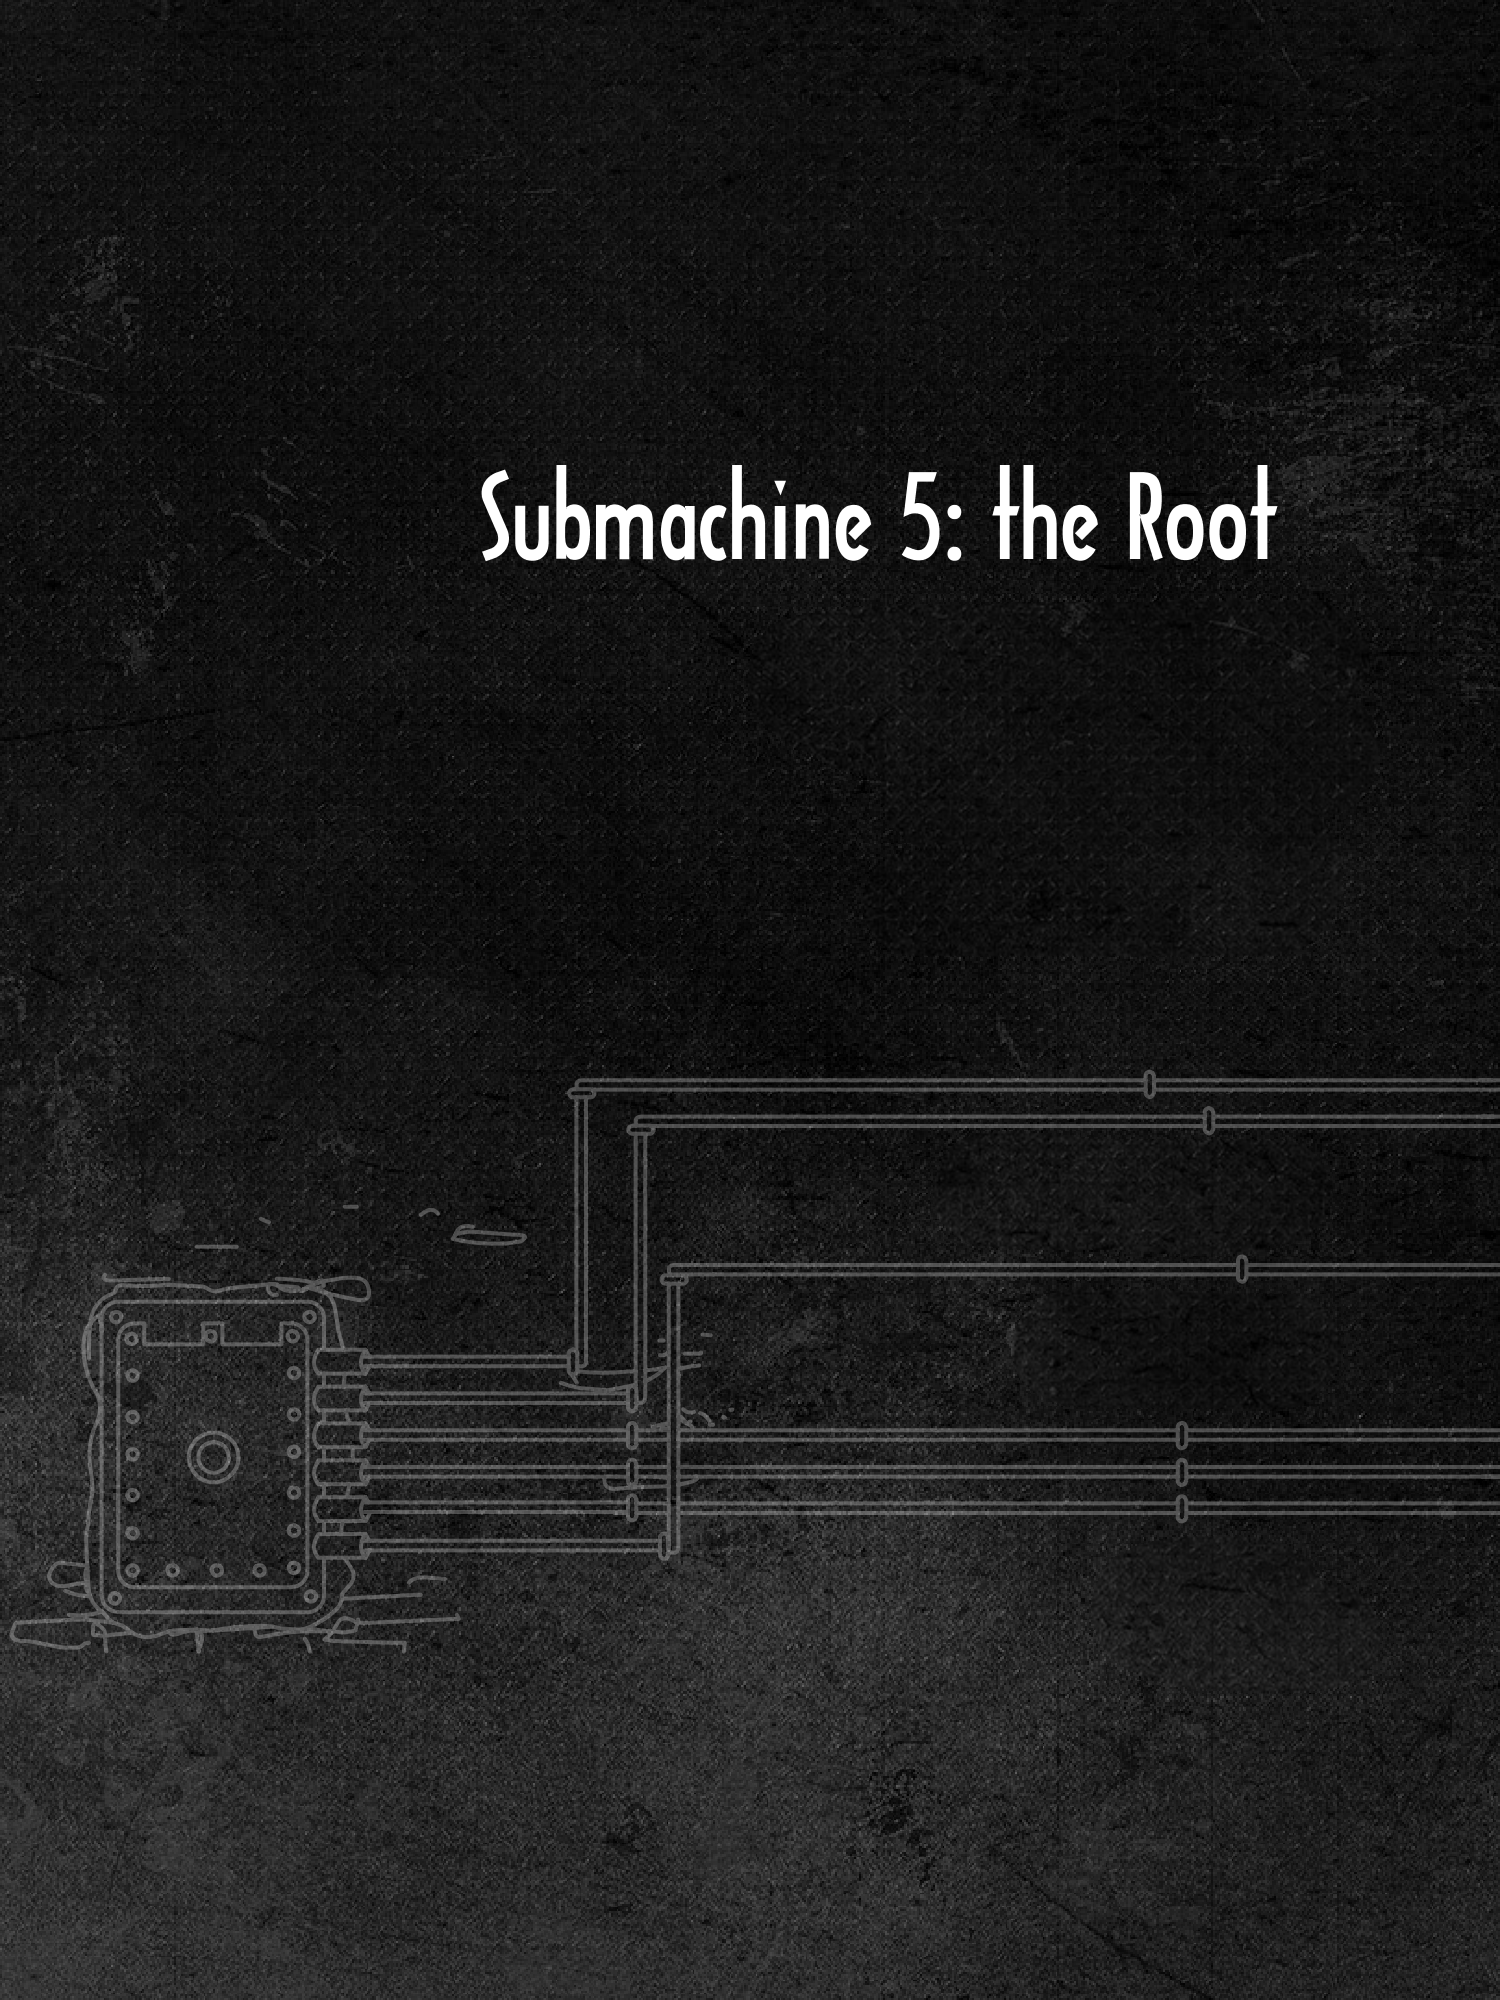 submachine-5-the-root-2014